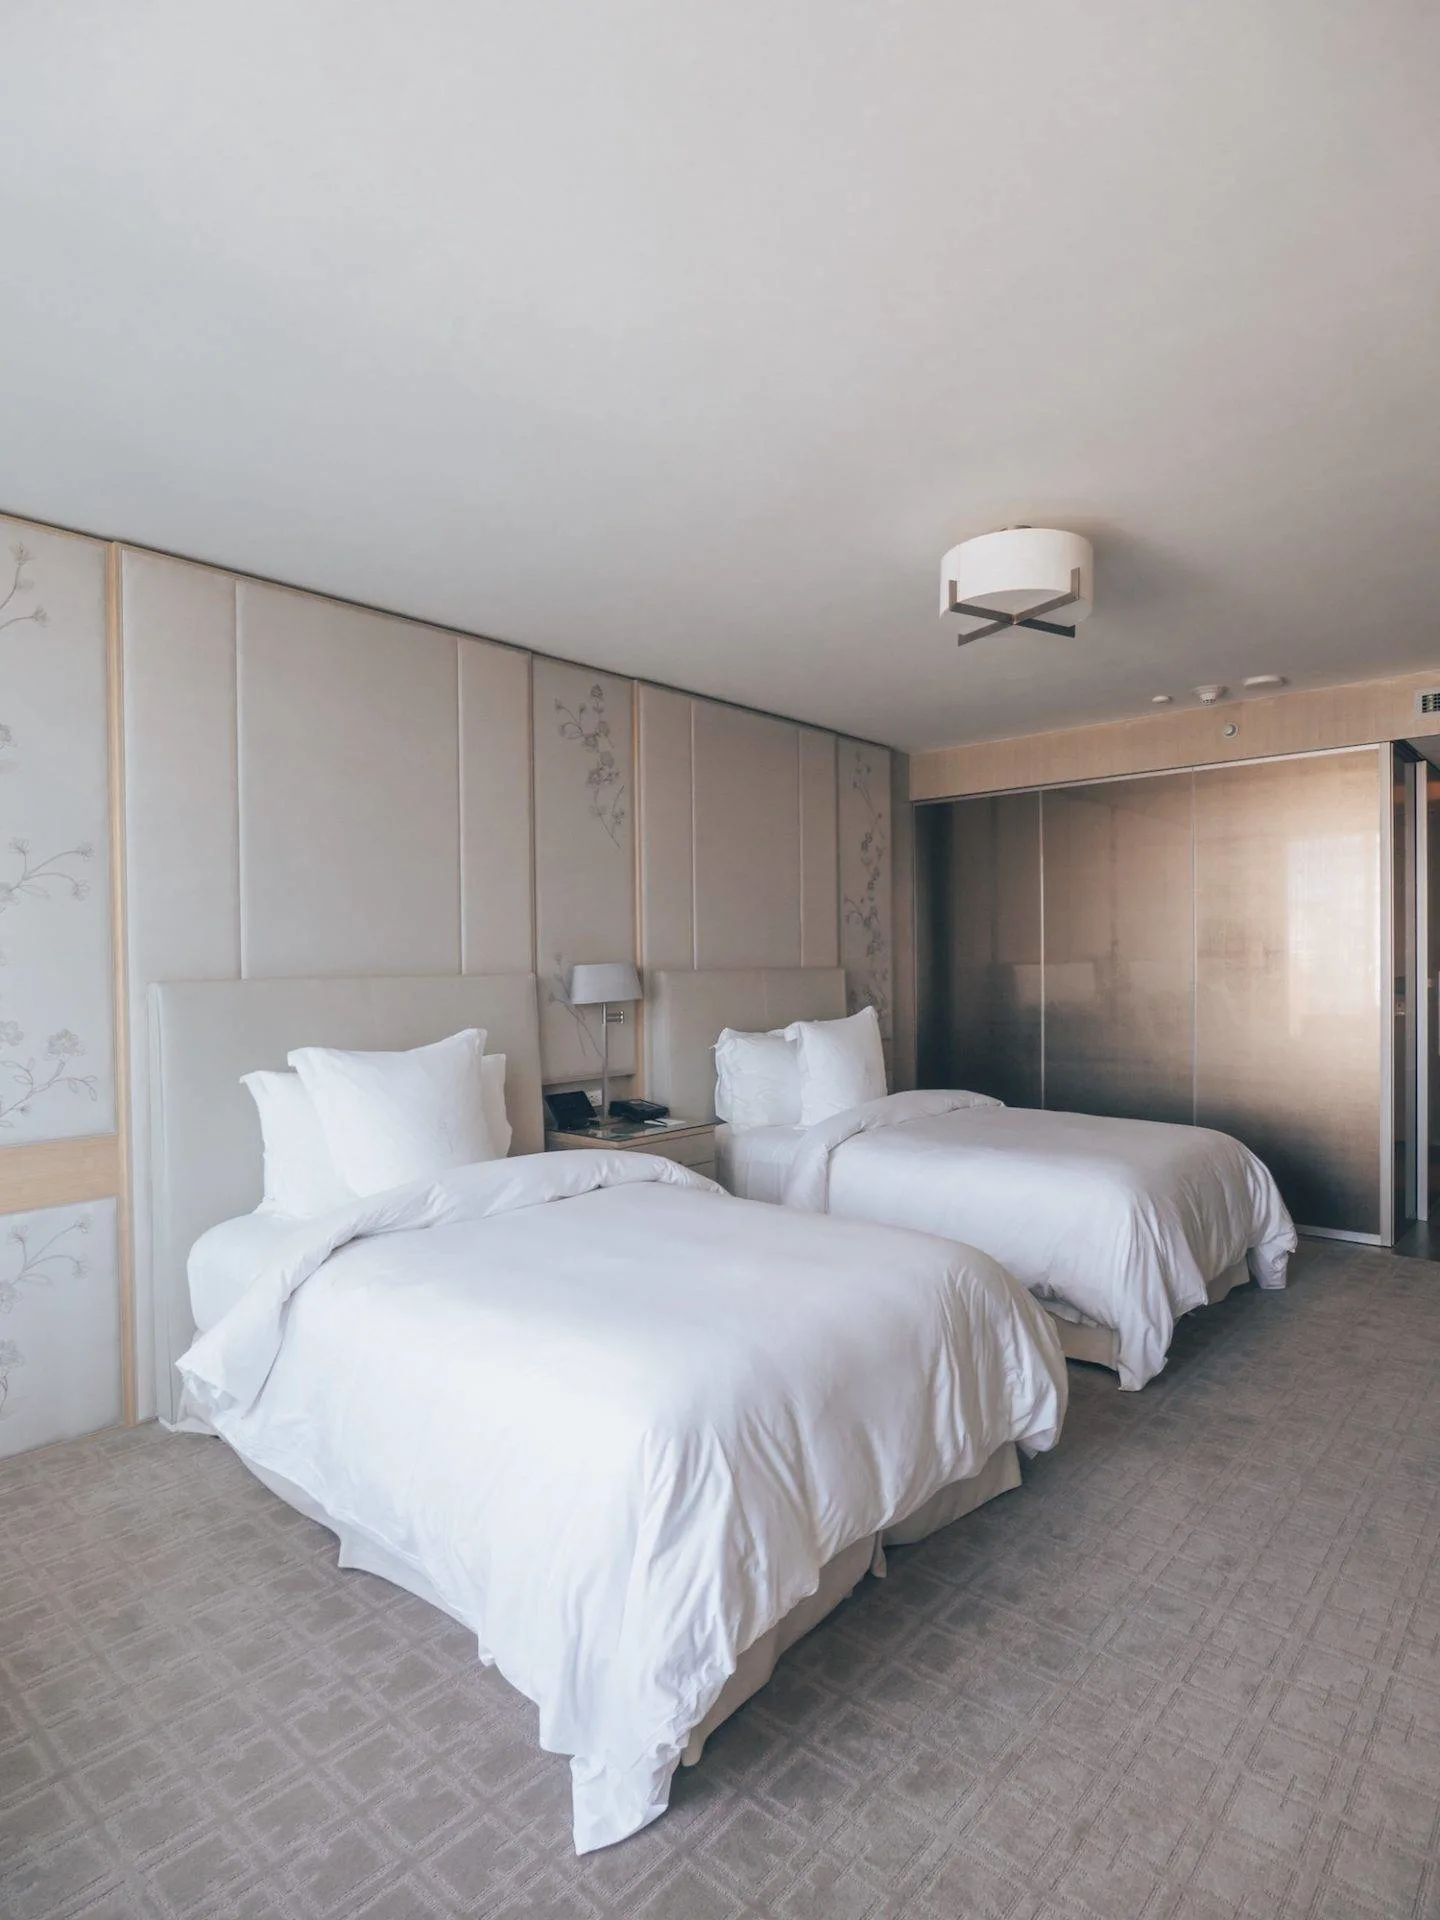 Four Seasons Toronto has the comfiest beds. Click to read the rest of the review and 18 reasons you'll love staying at this hotel!